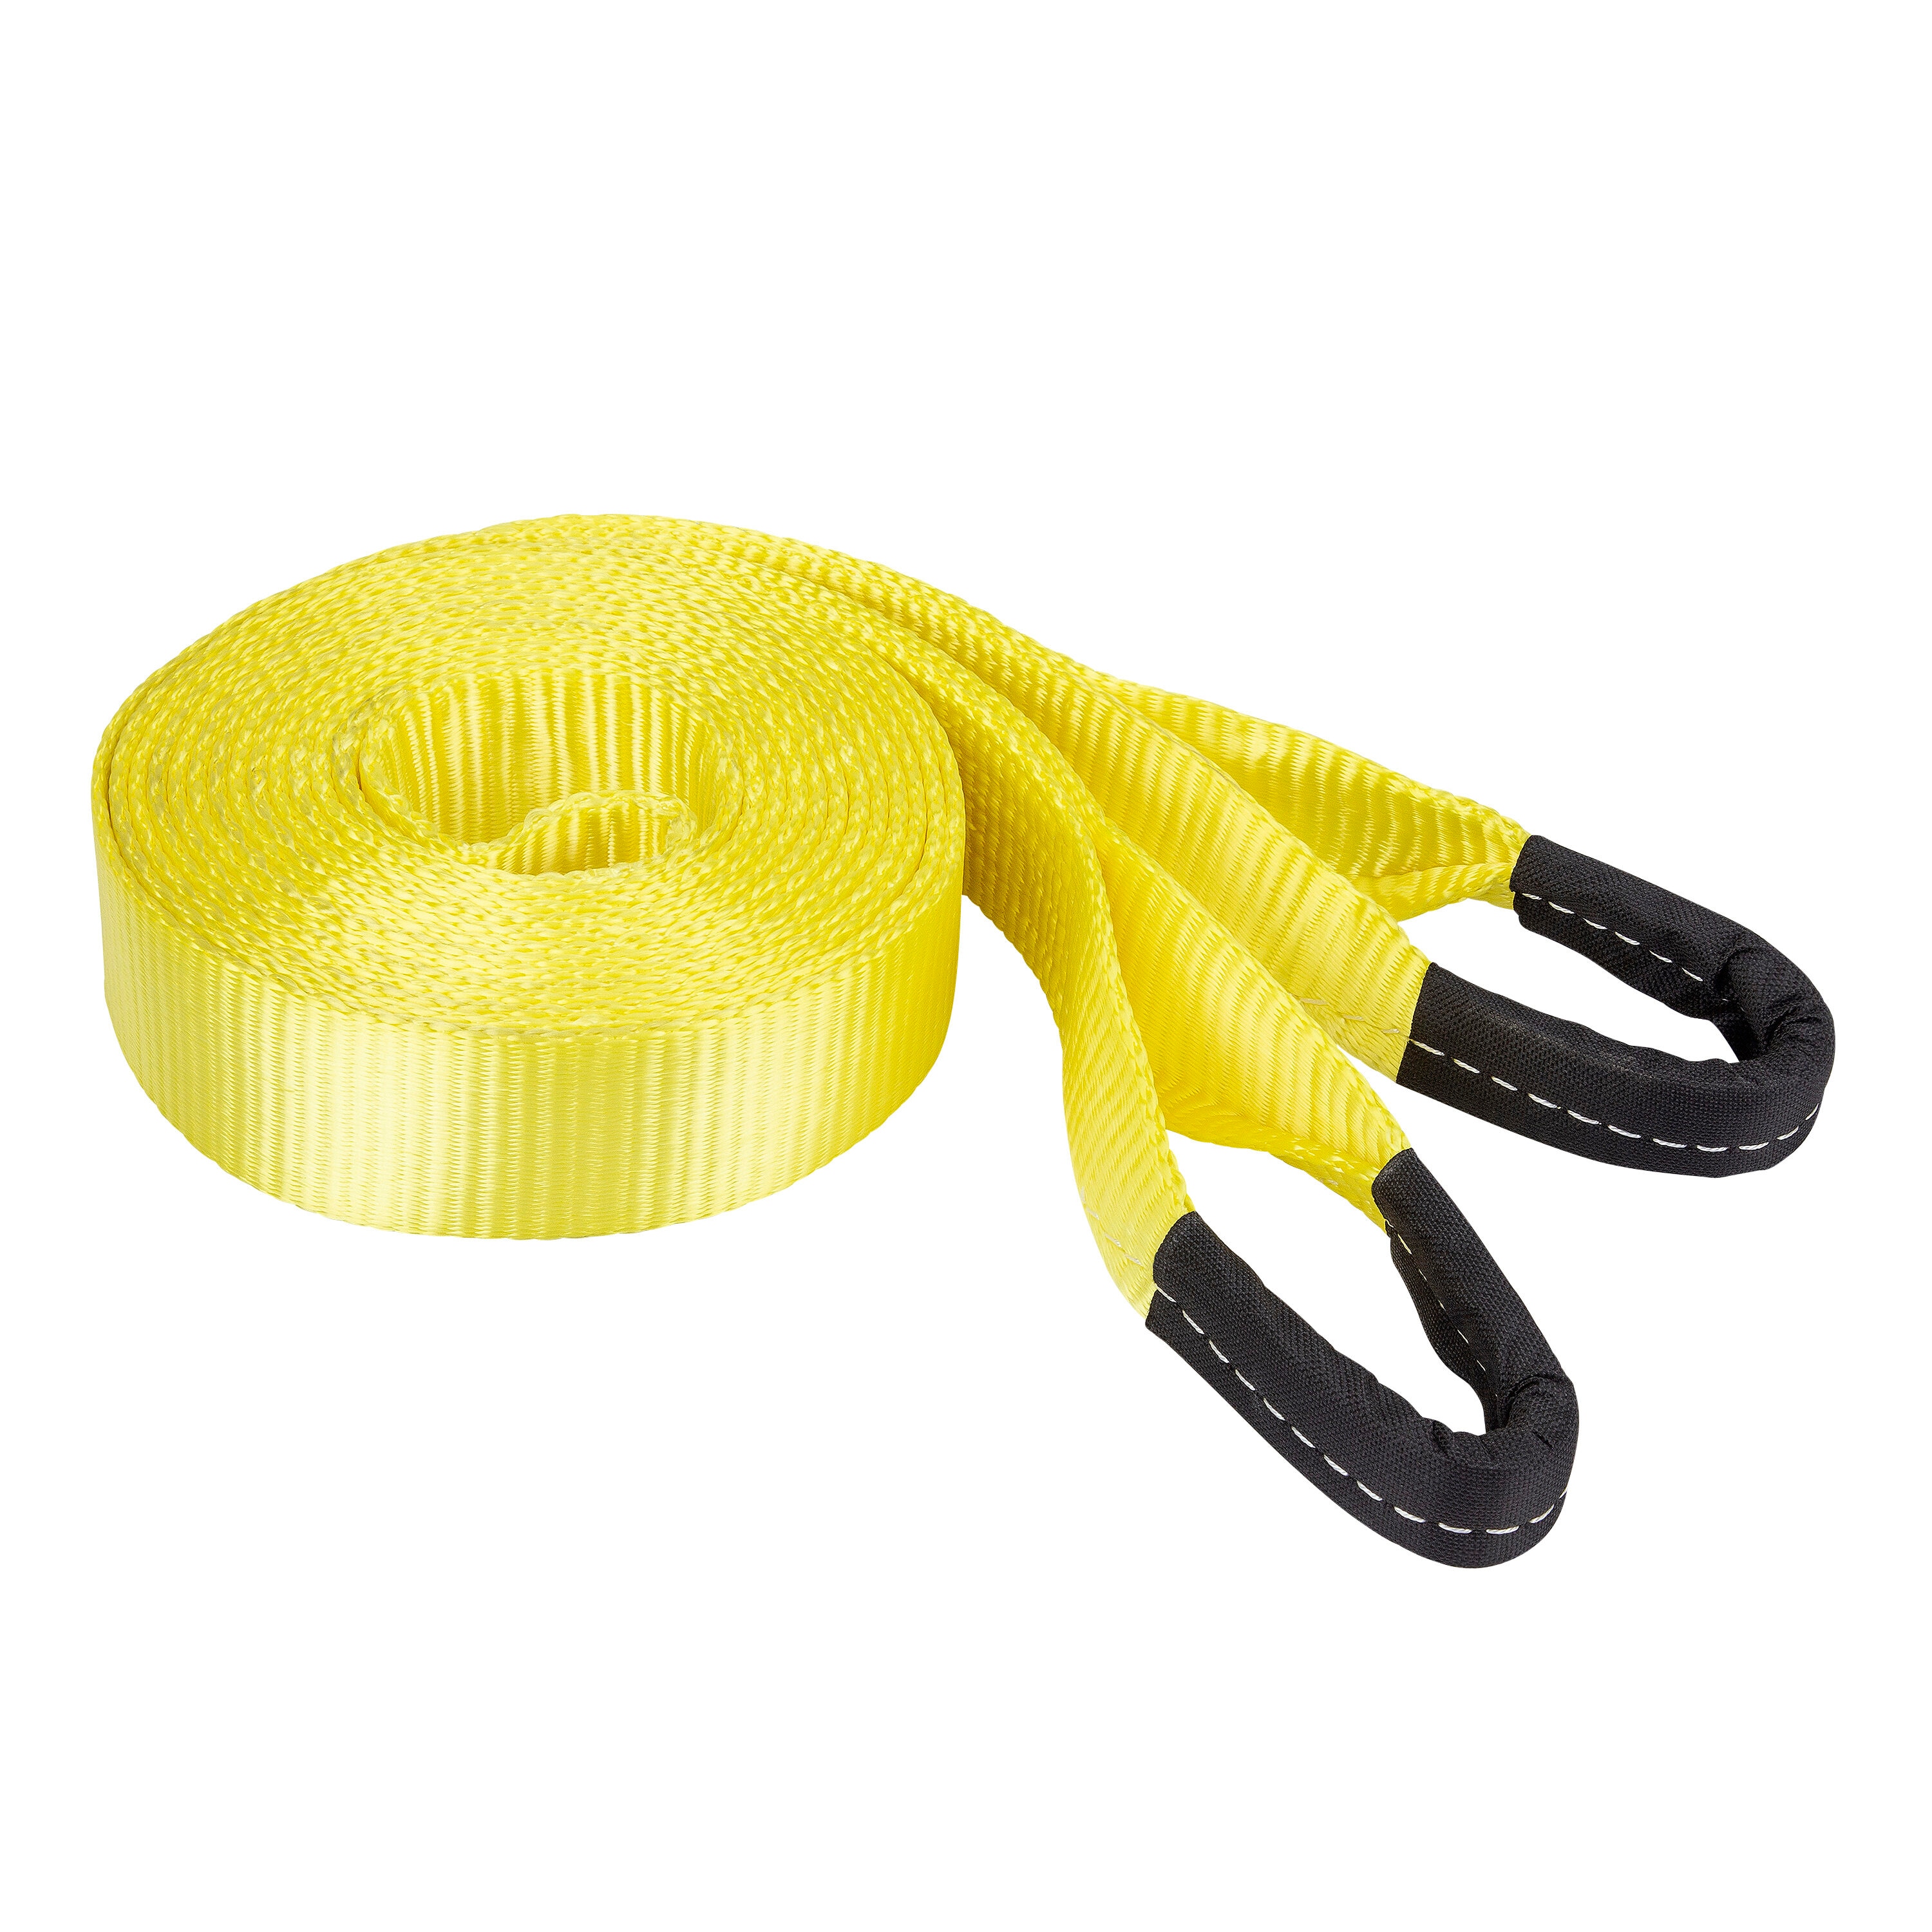 Tow Hooks  Straps, Chains & Ropes by Official Brands